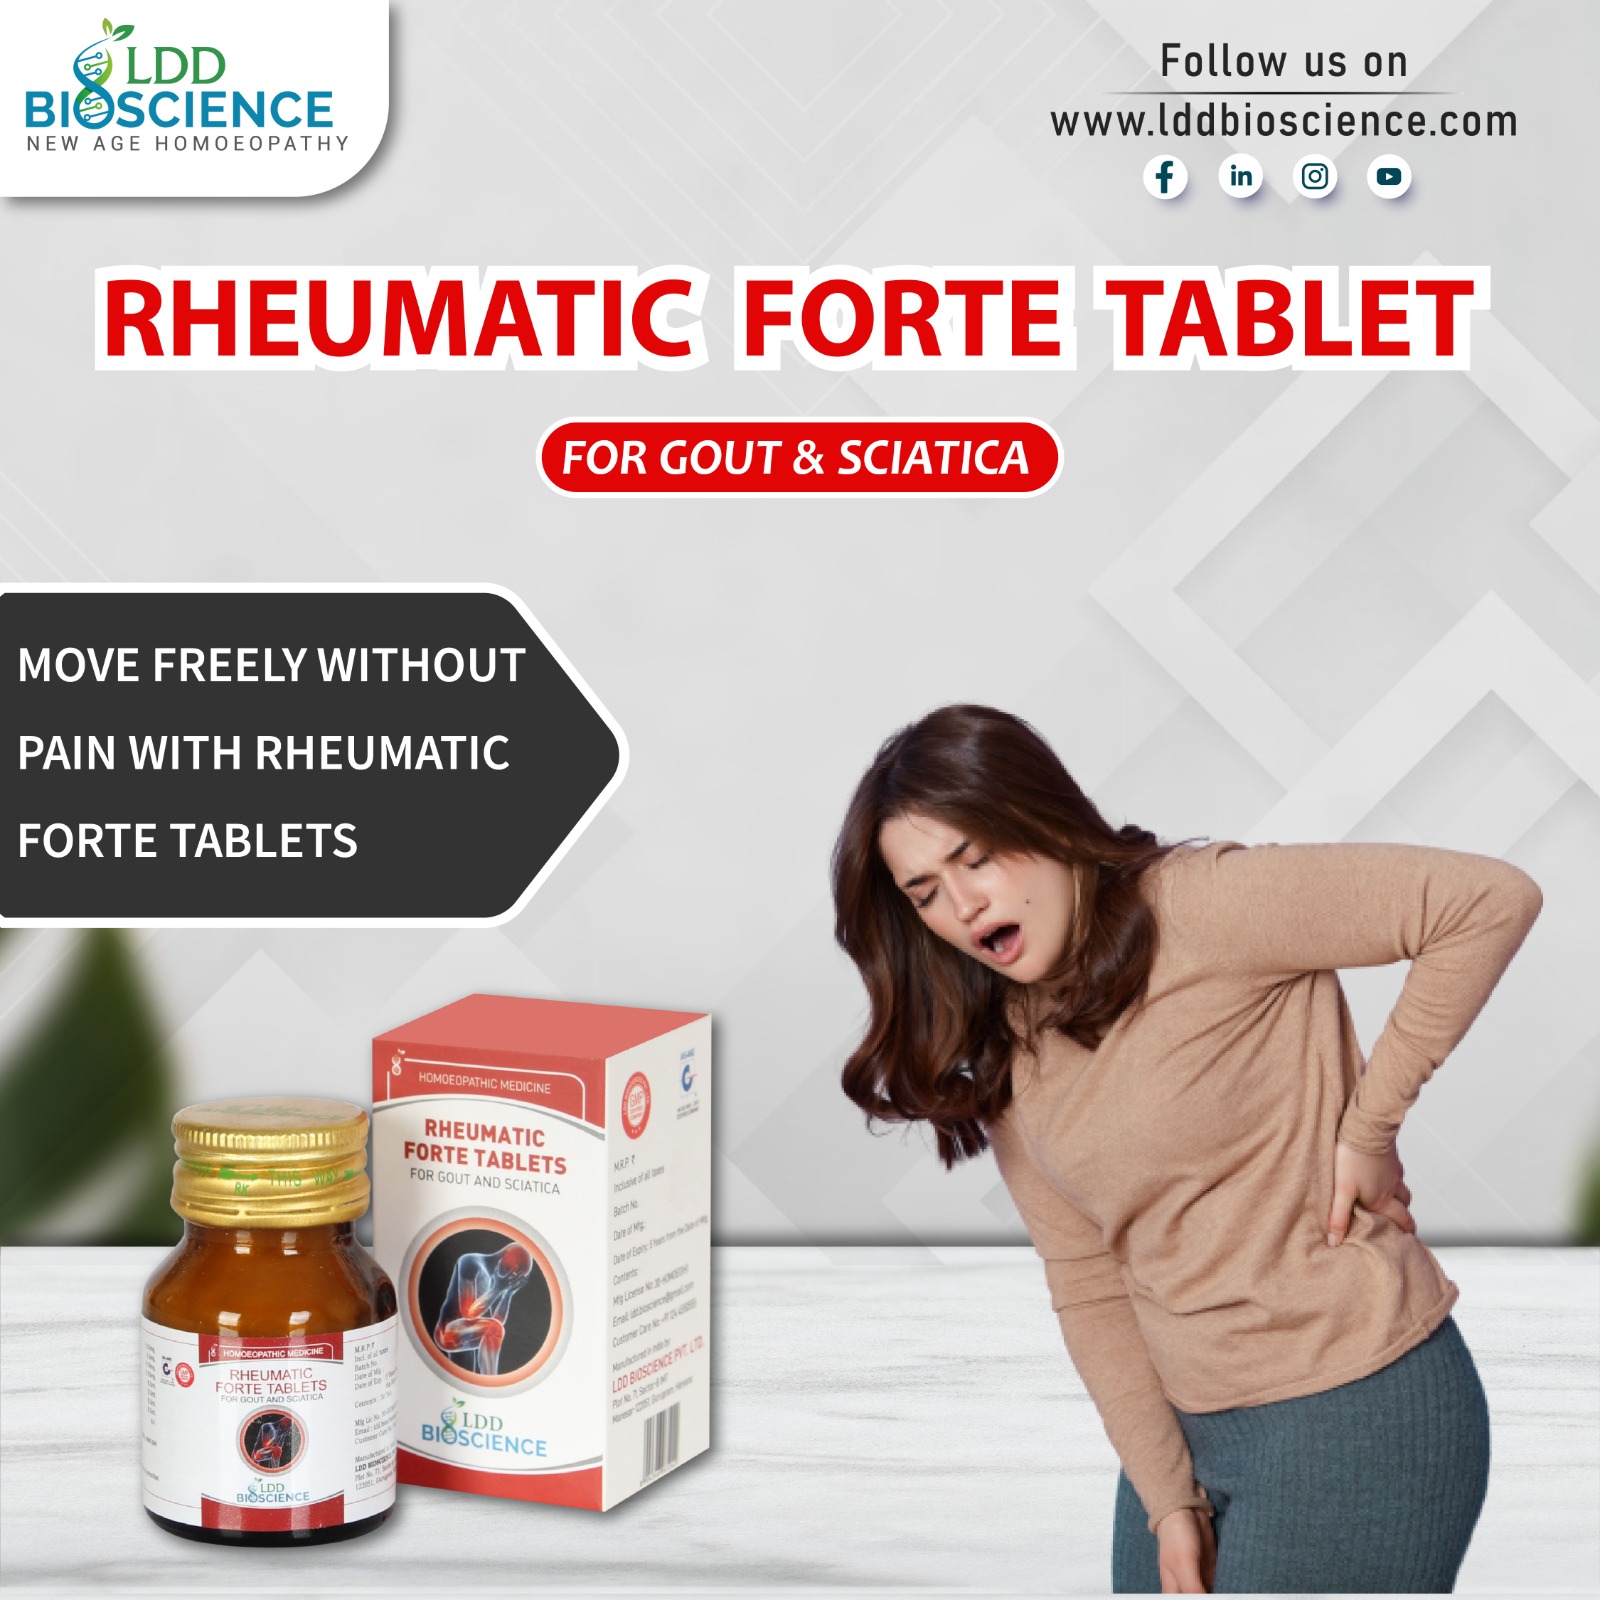 LDD Bioscience RHEUMATIC FORTE TABLETS relief in joint and muscular pains